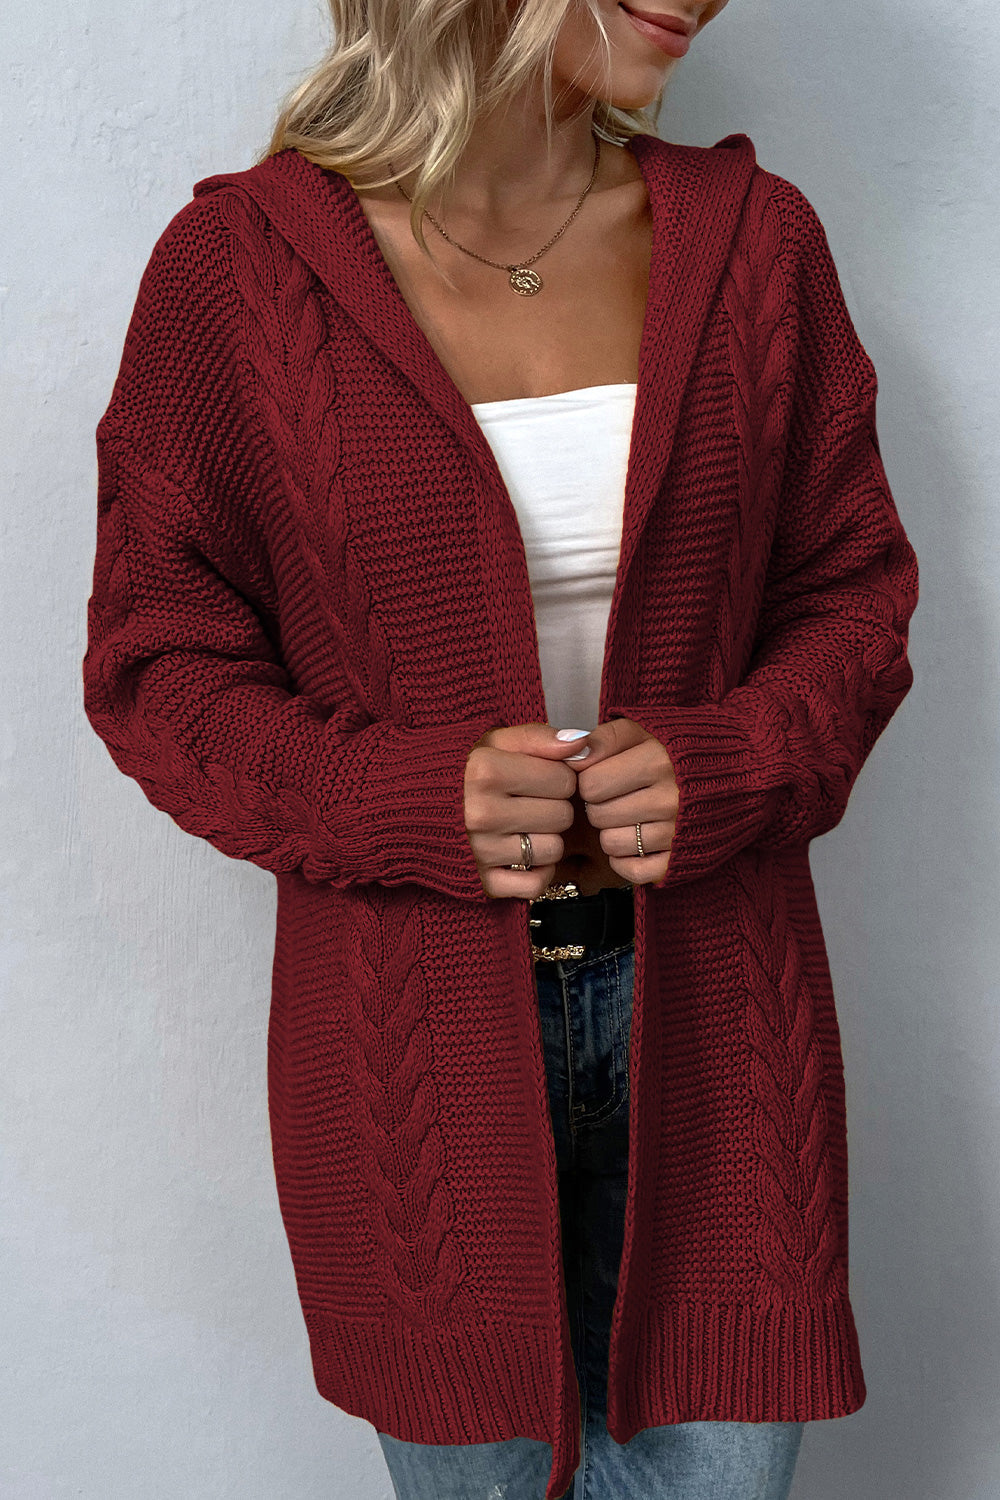 Cable-Knit Dropped Shoulder Hooded Cardigan - Red / S - Women’s Clothing & Accessories - Shirts & Tops - 10 - 2024